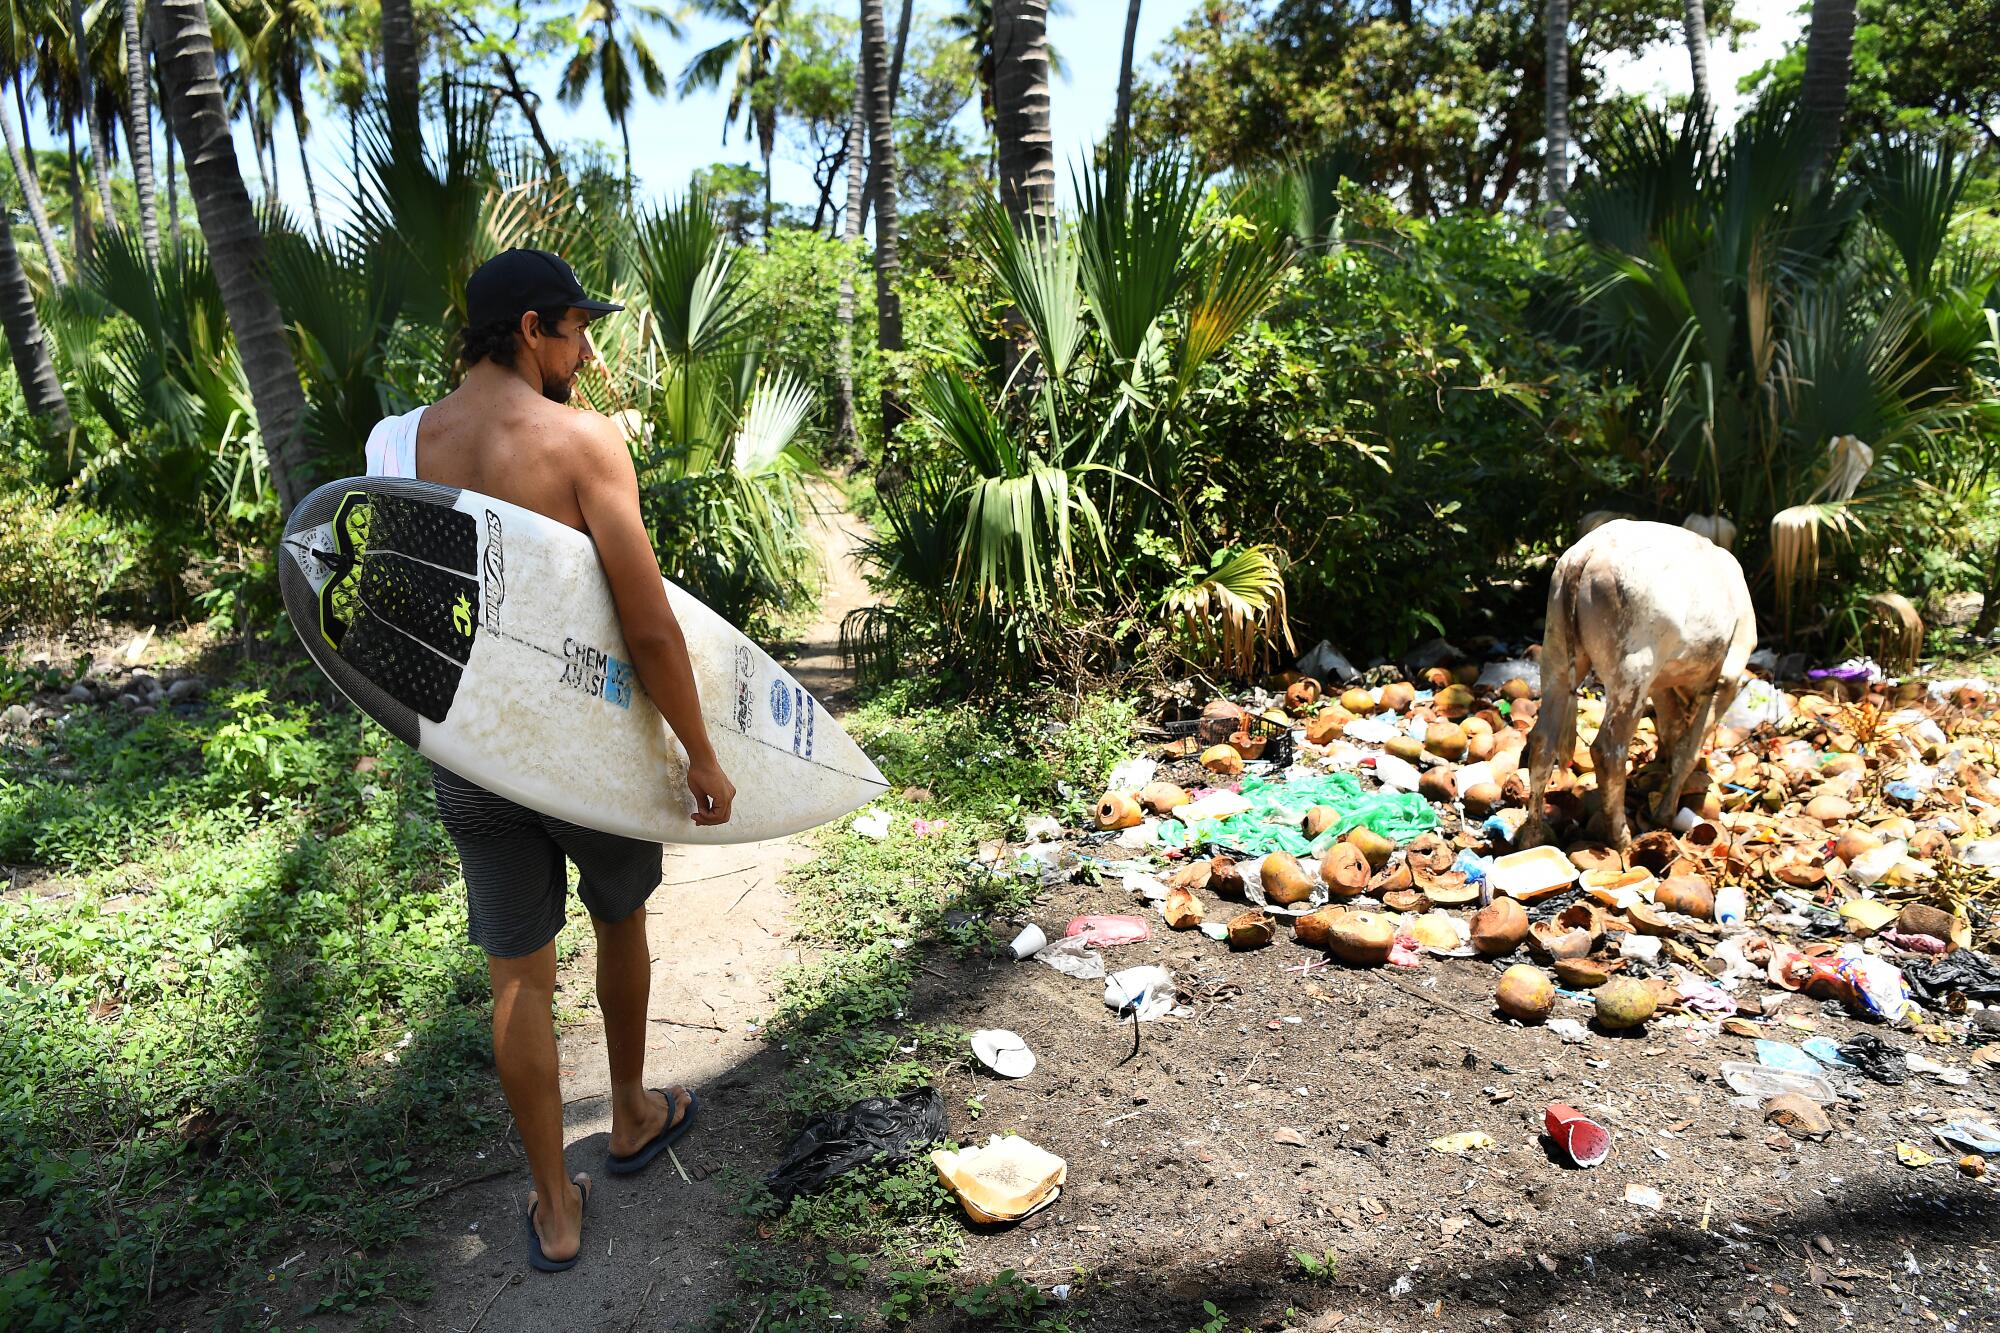  Surfer Bryan Perez walks past a cow foraging in trash 